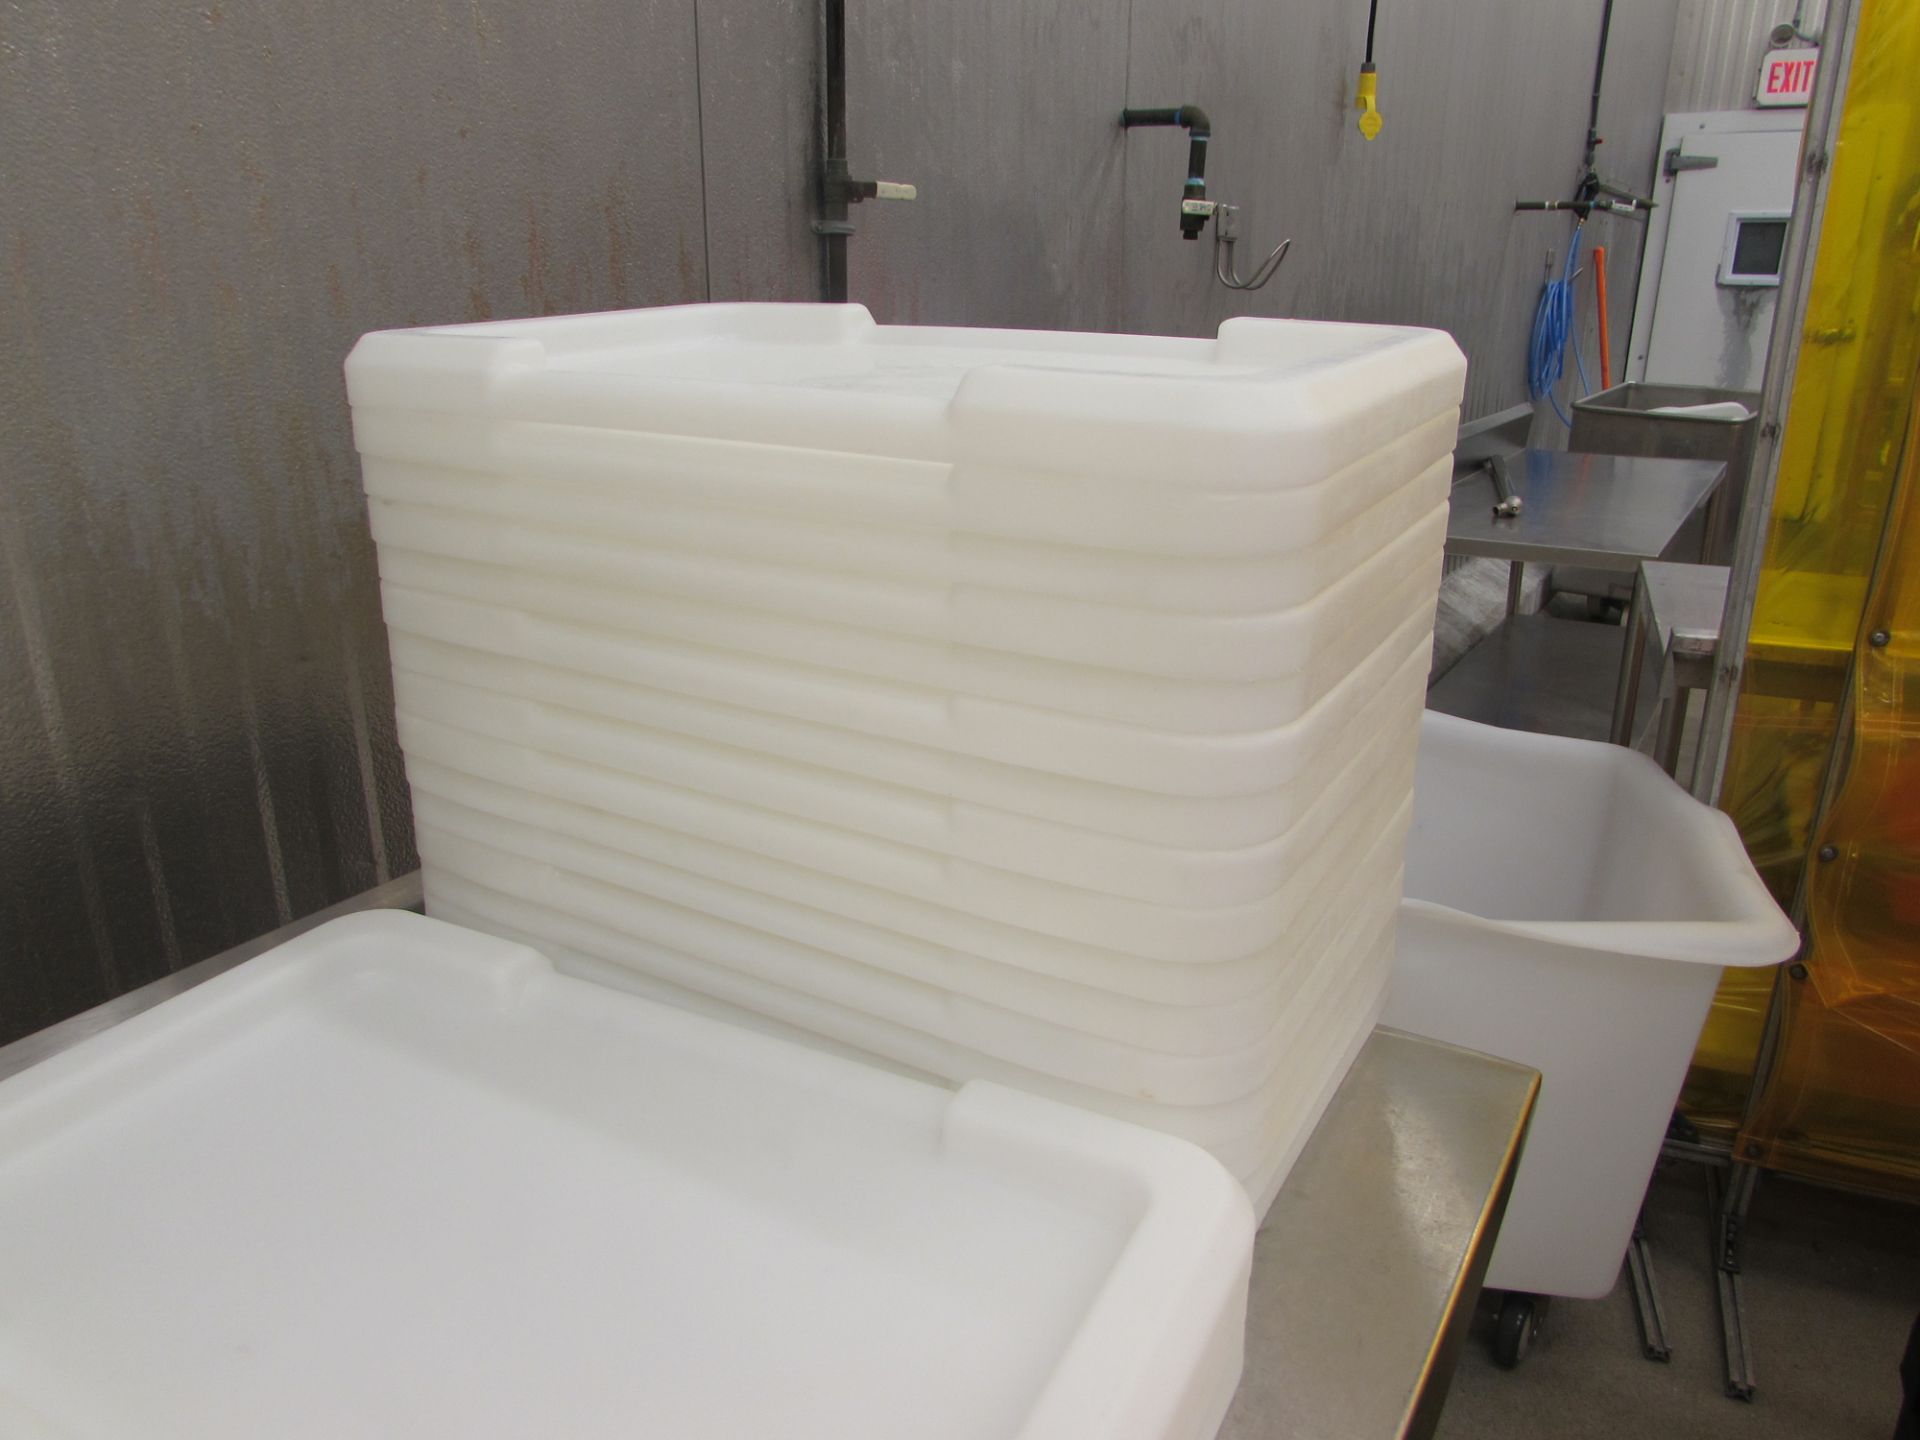 Hantover & Toteall 2000 Stack & Nest Poly Meat Lug Totes, - Image 2 of 4